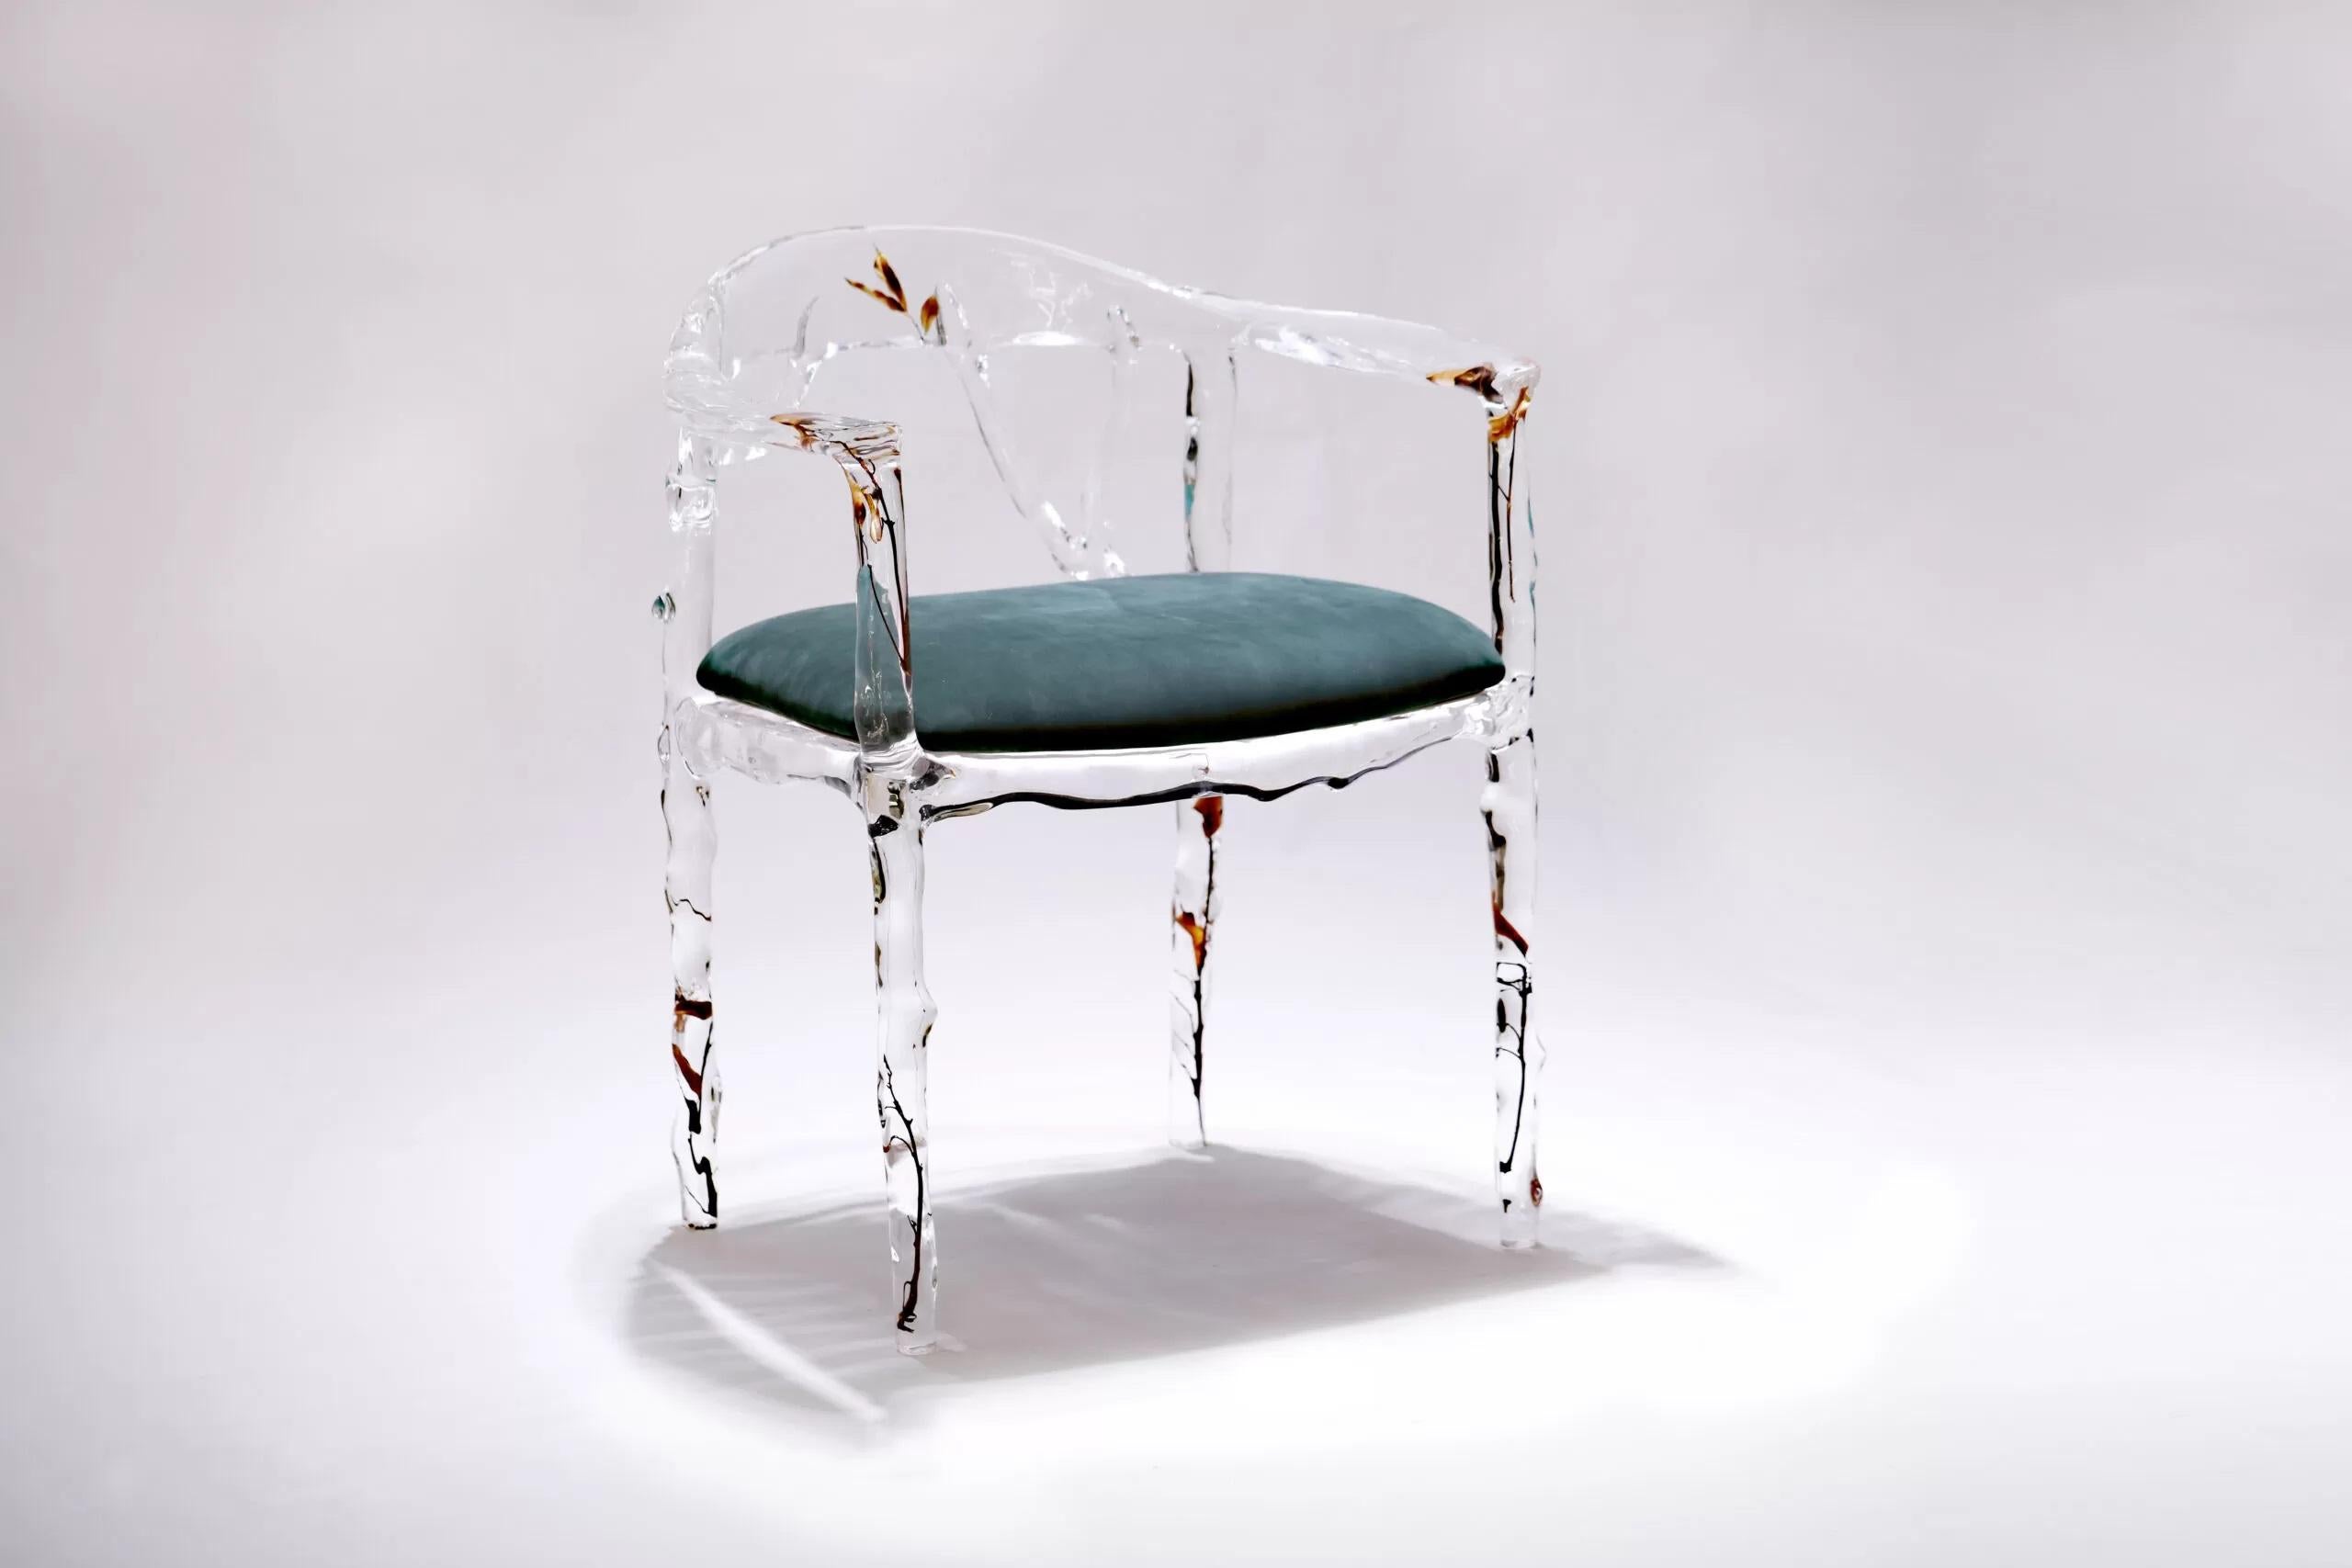 Branched Crystal Leather Chair by Dainte
Dimensions: D 63 x W 53 x H 74 cm.
Materials: Crystal and Twigs.

Available in different color leather options:  Camel, maroon, orange, purple
and sand. Please contact us.

Discover a whole new lease of life